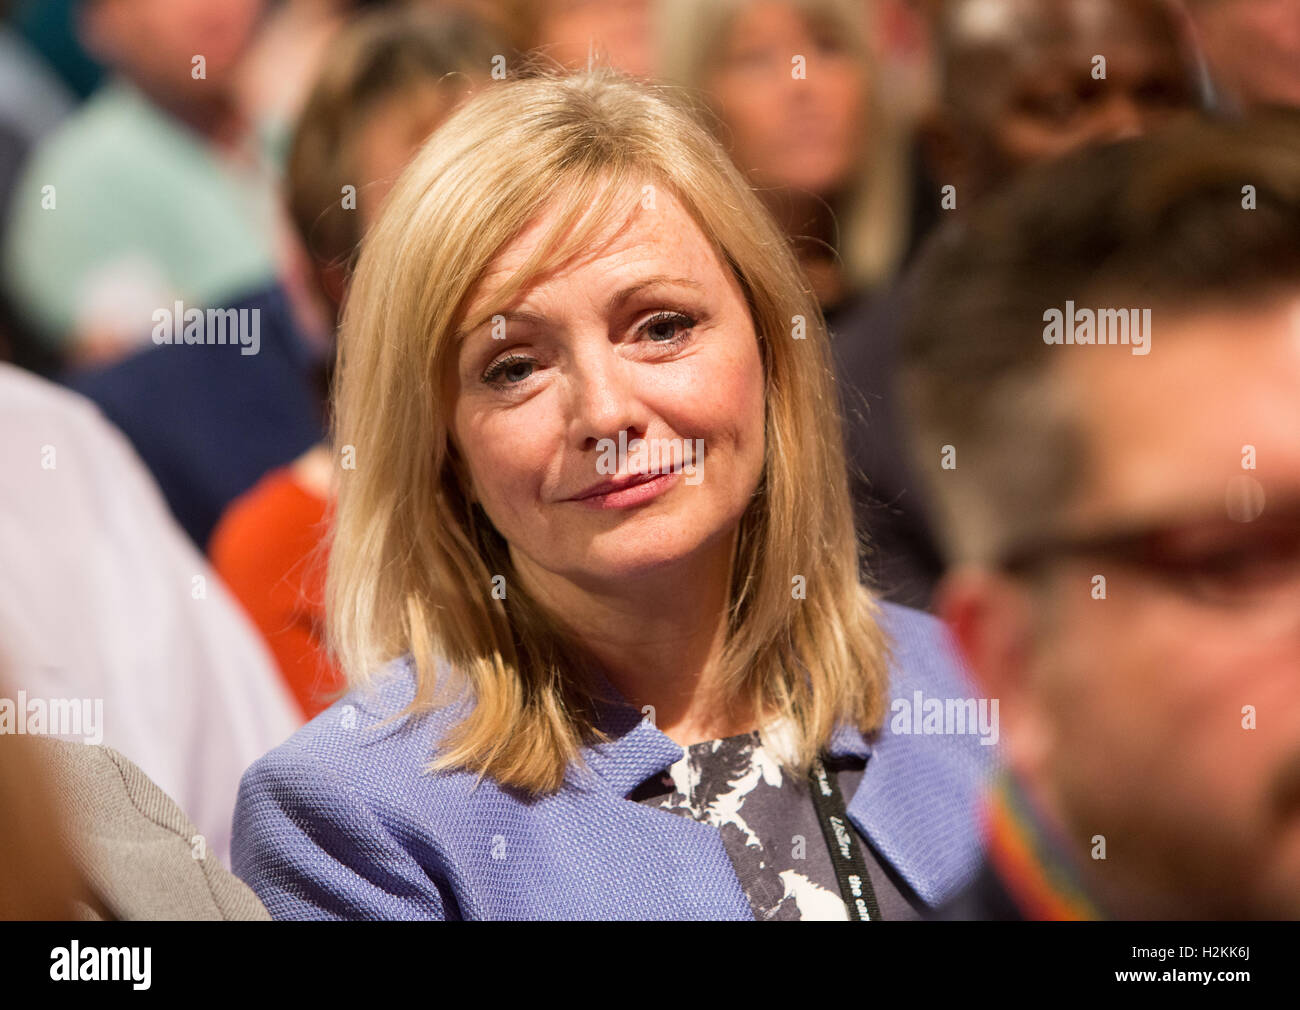 Tracy Brabin,former Coronation street actress,at the Labour party conference 2016.She is set to stand as MP for Batley and Spen. Stock Photo